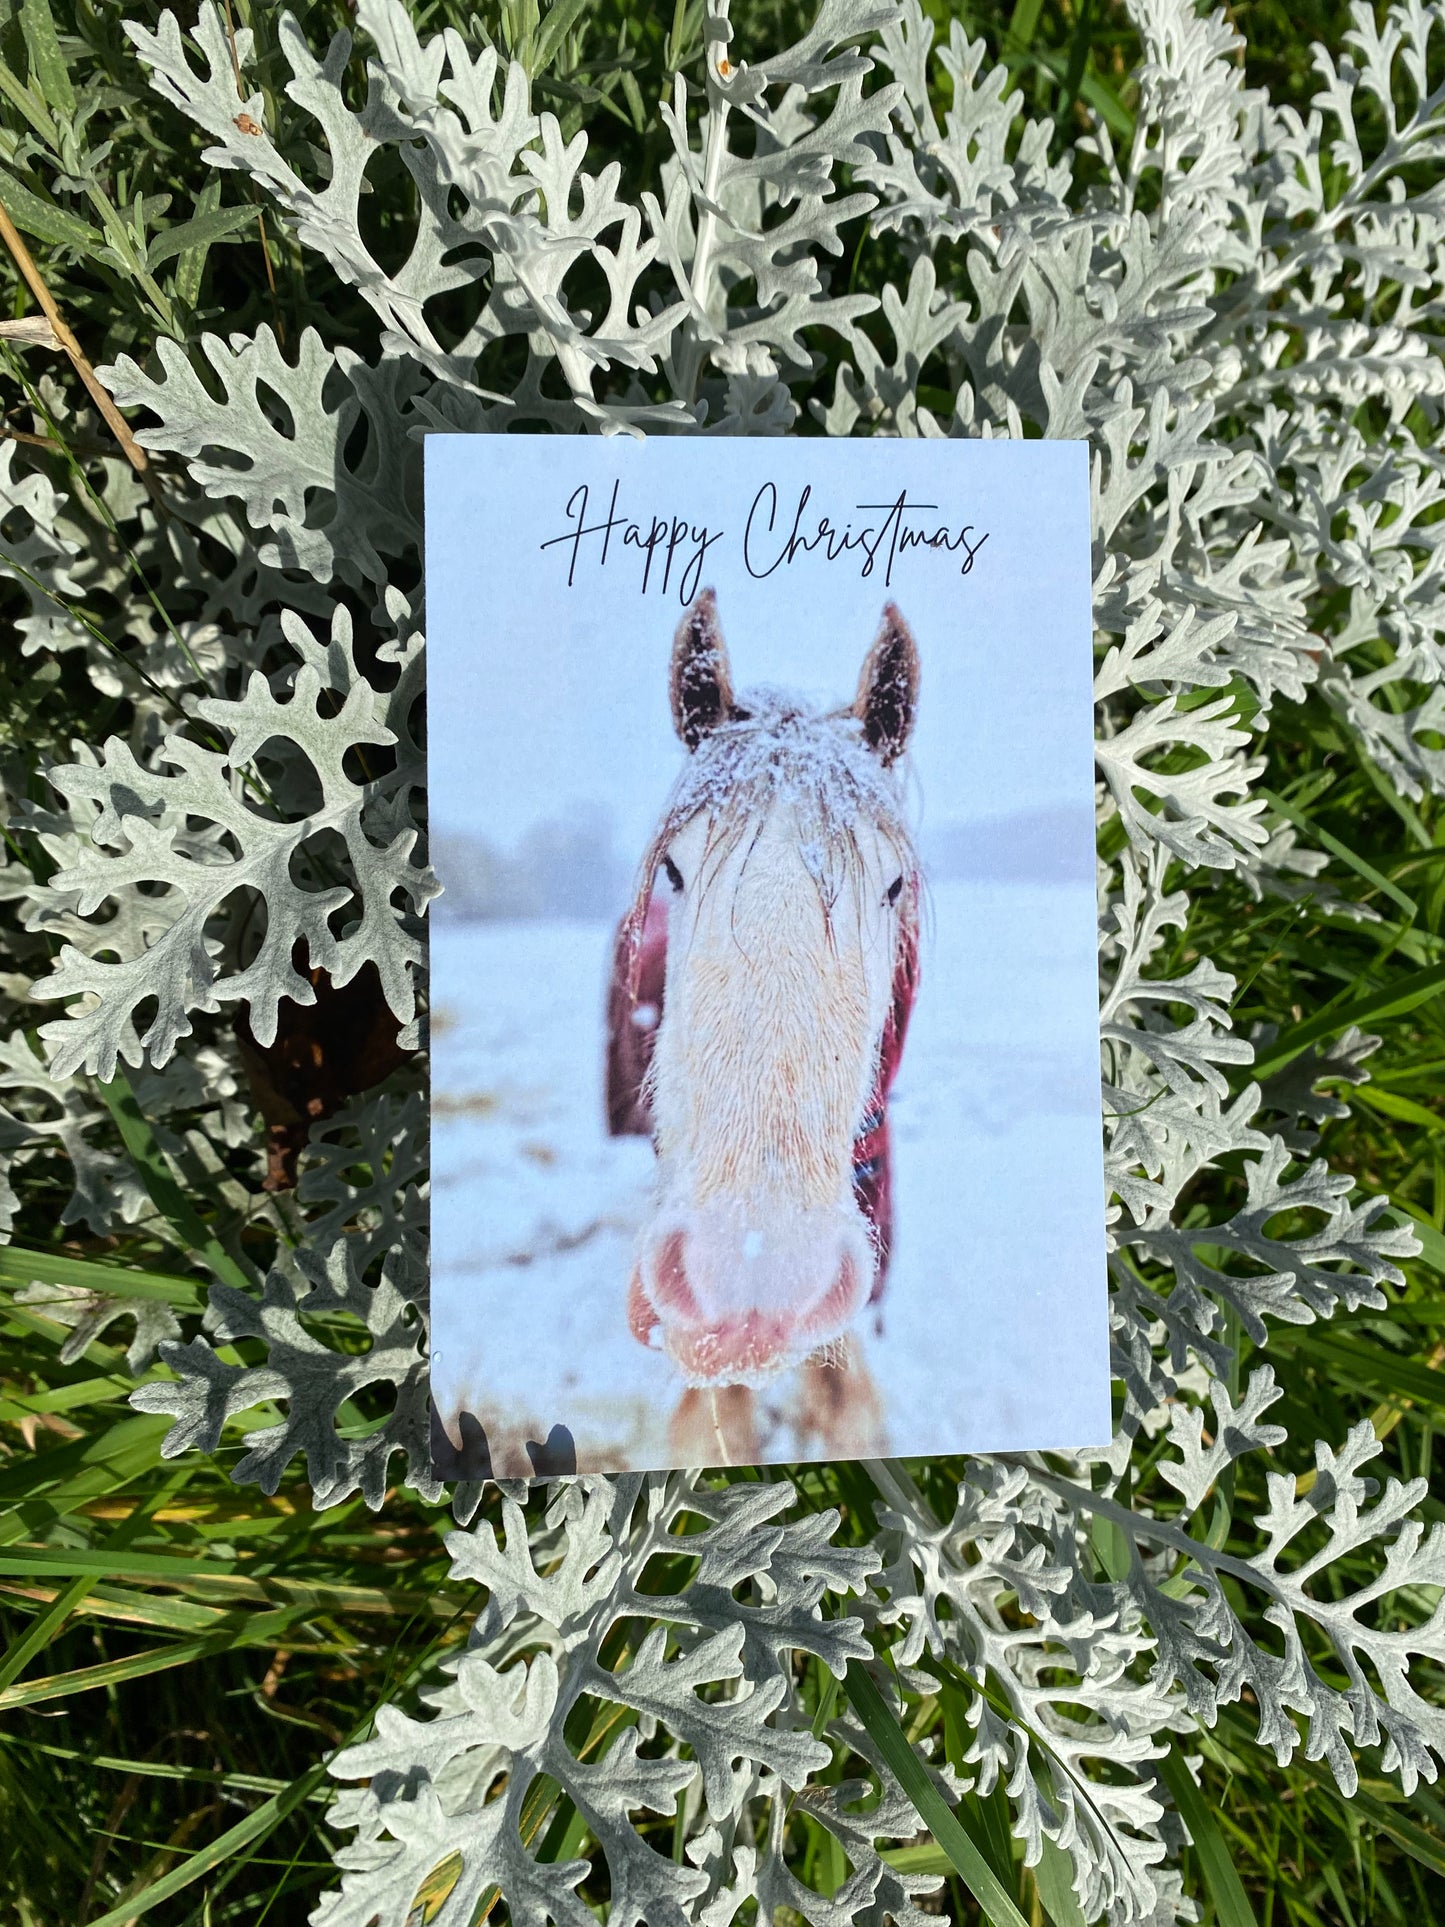 HorseWorld Charity Christmas Cards